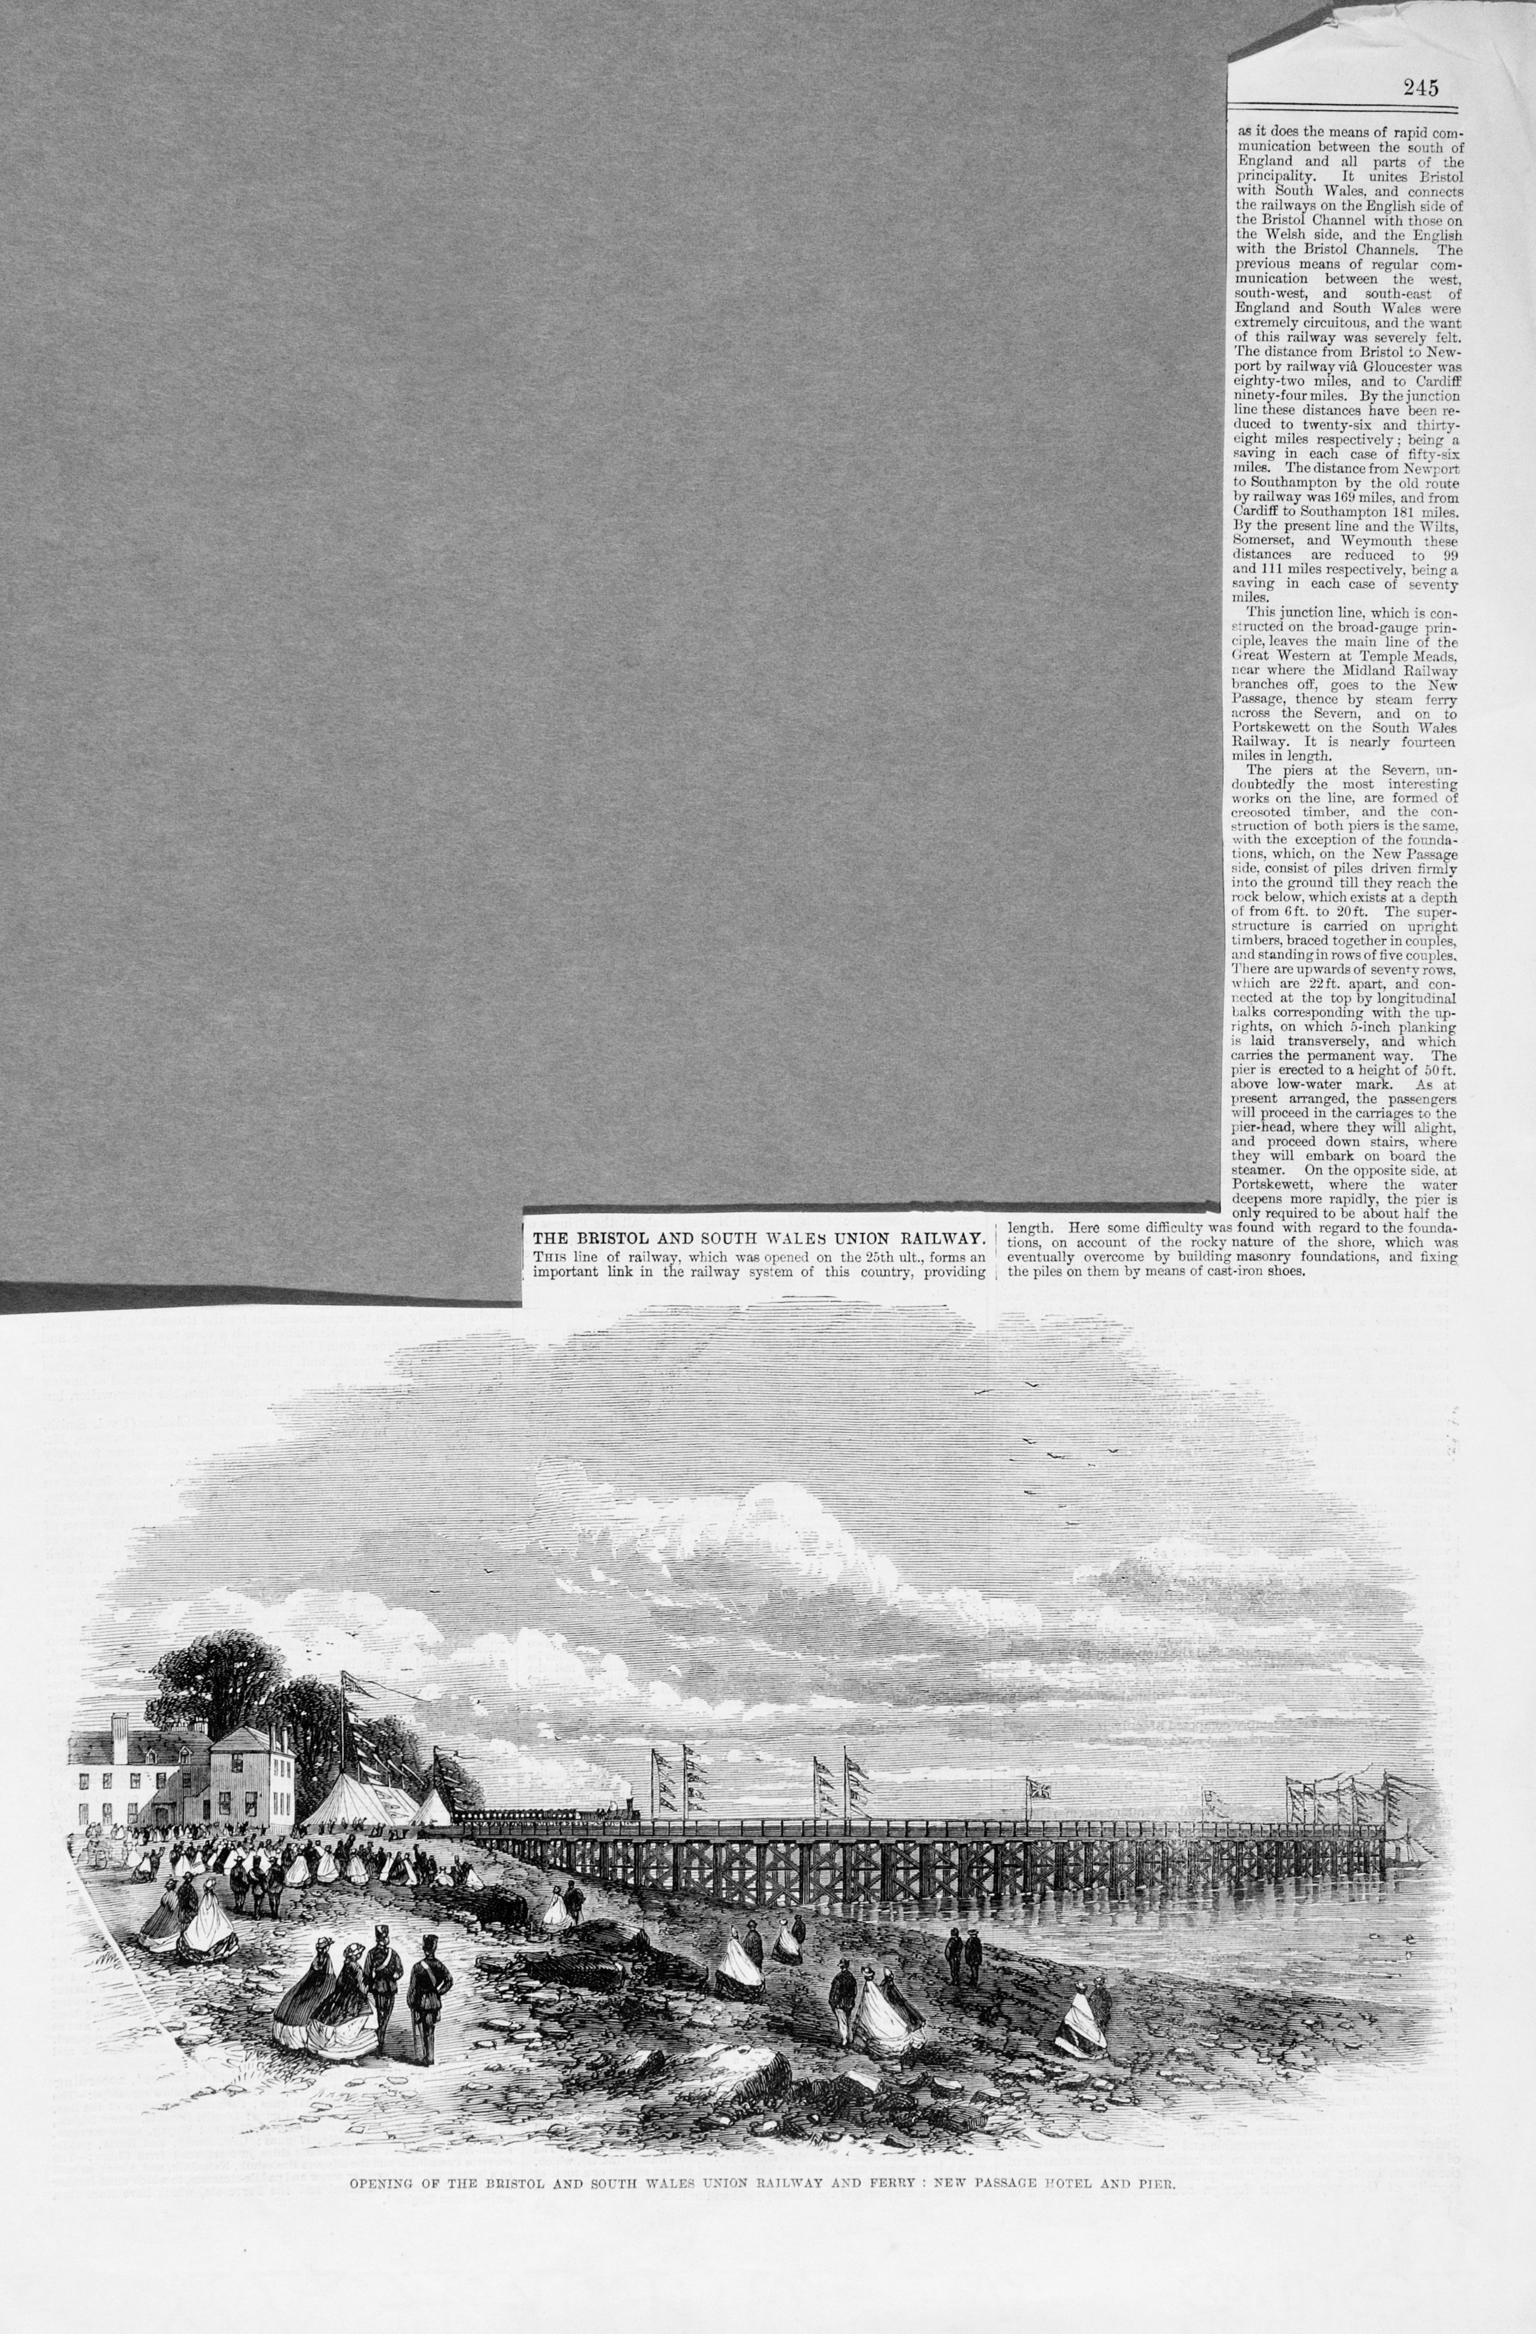 Opening of the Bristol & S. Wales Union Rly. (print)